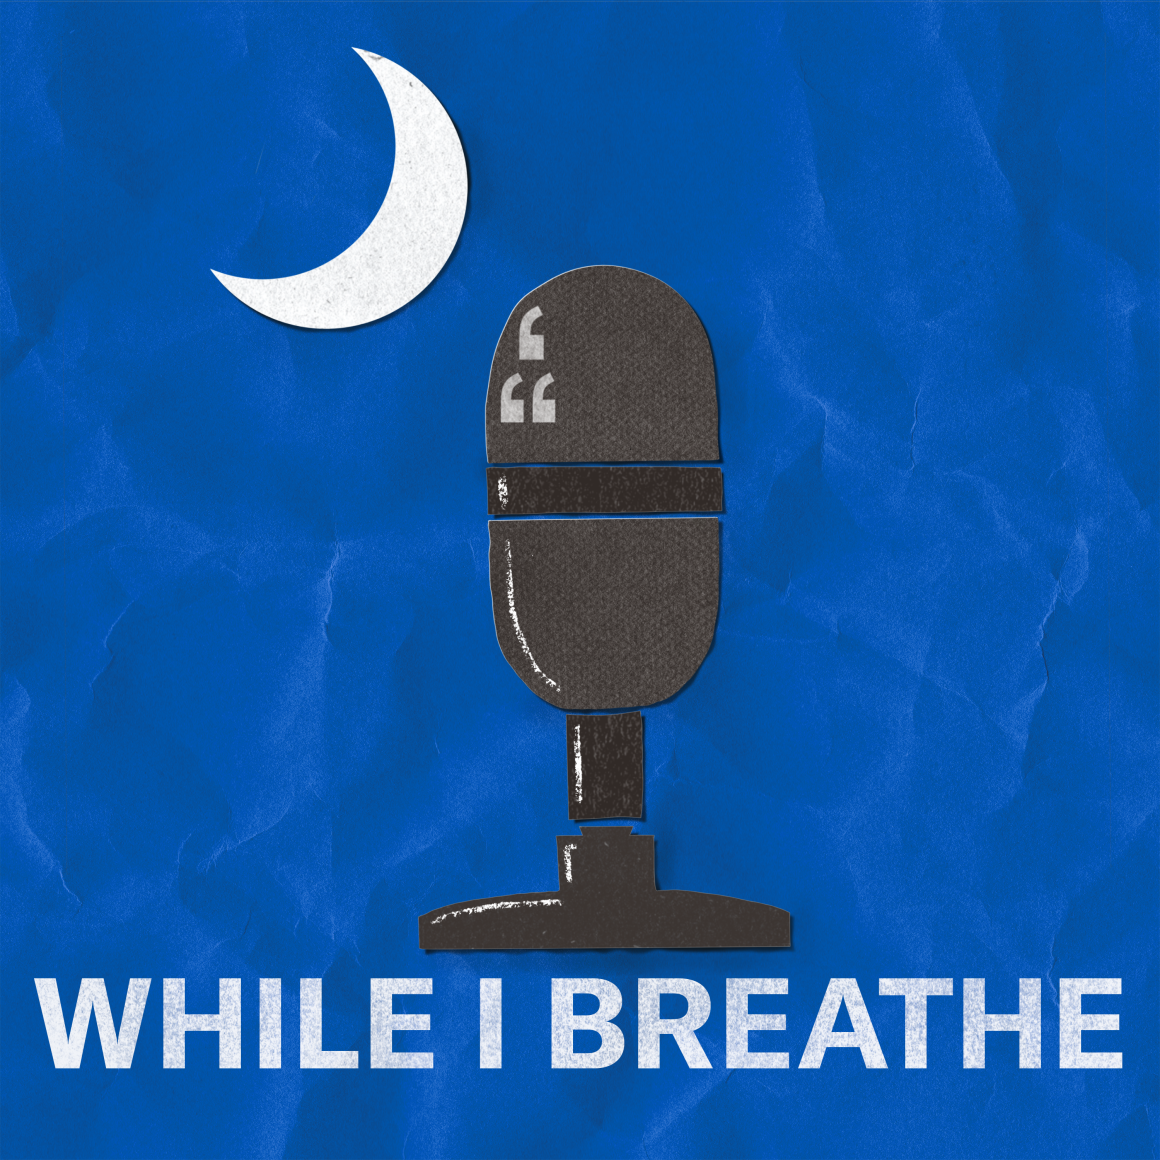 A blue square podcast logo featuring a microphone and a crescent moon in the shape of the South Carolina flag. The words "While I Breathe" appear at the bottom.